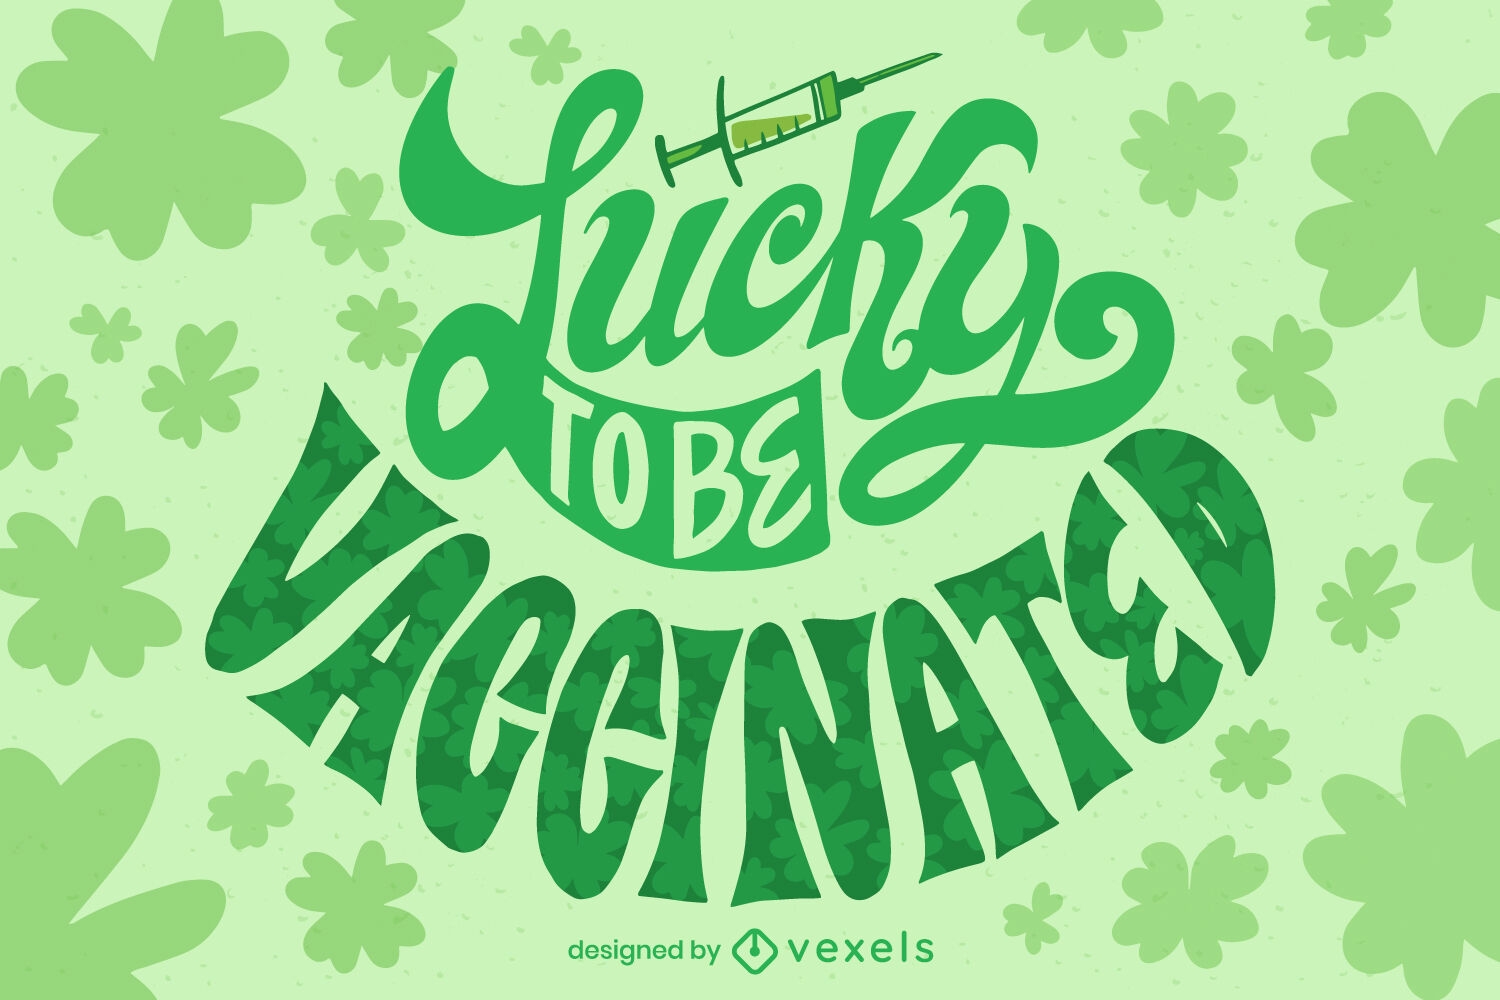 Lucky to be vaccinated St. Patrick's Day illustration design